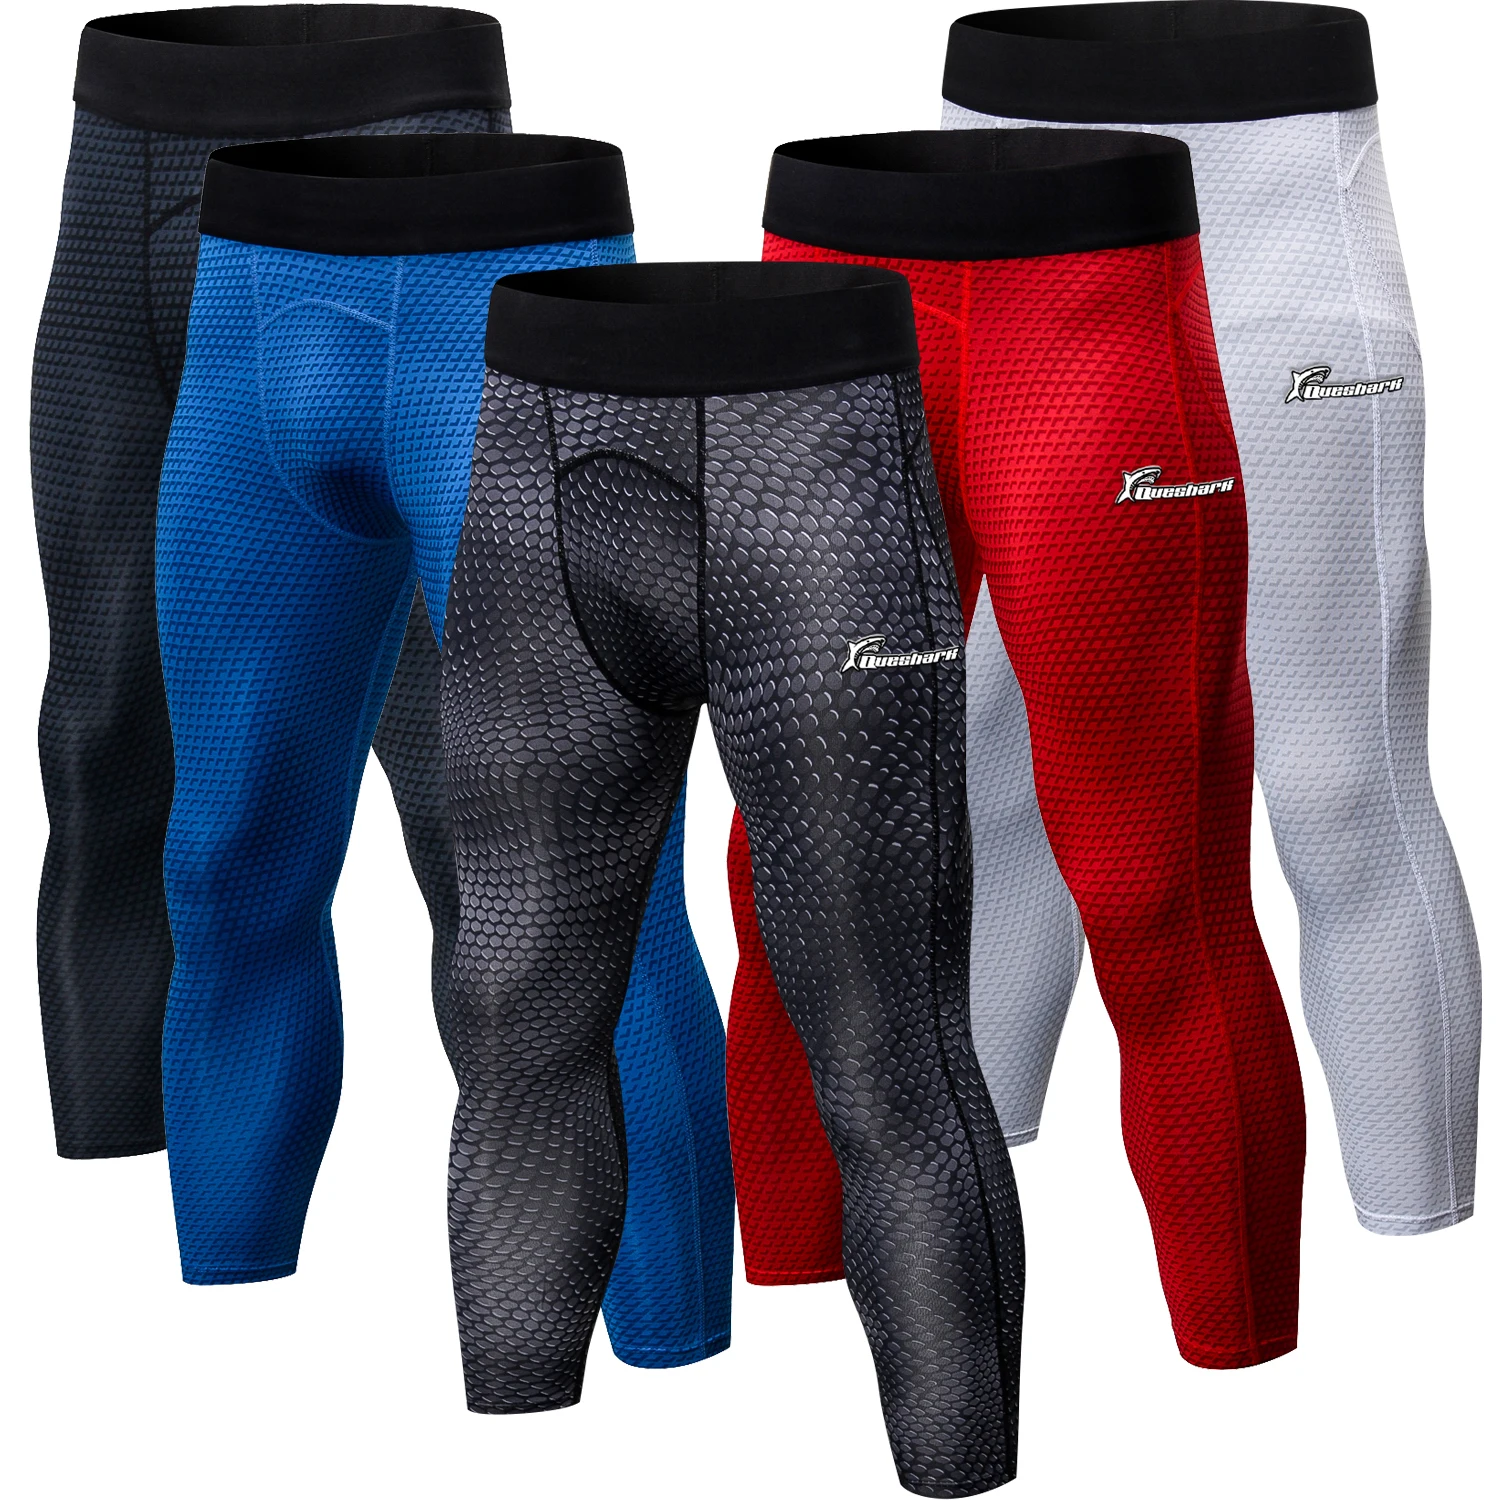 

QUESHARK Mens Men's Compression Dry Cool Sports Cropped Tights Pants Baselayer Running Leggings Yoga For Fitness Bodybuilding